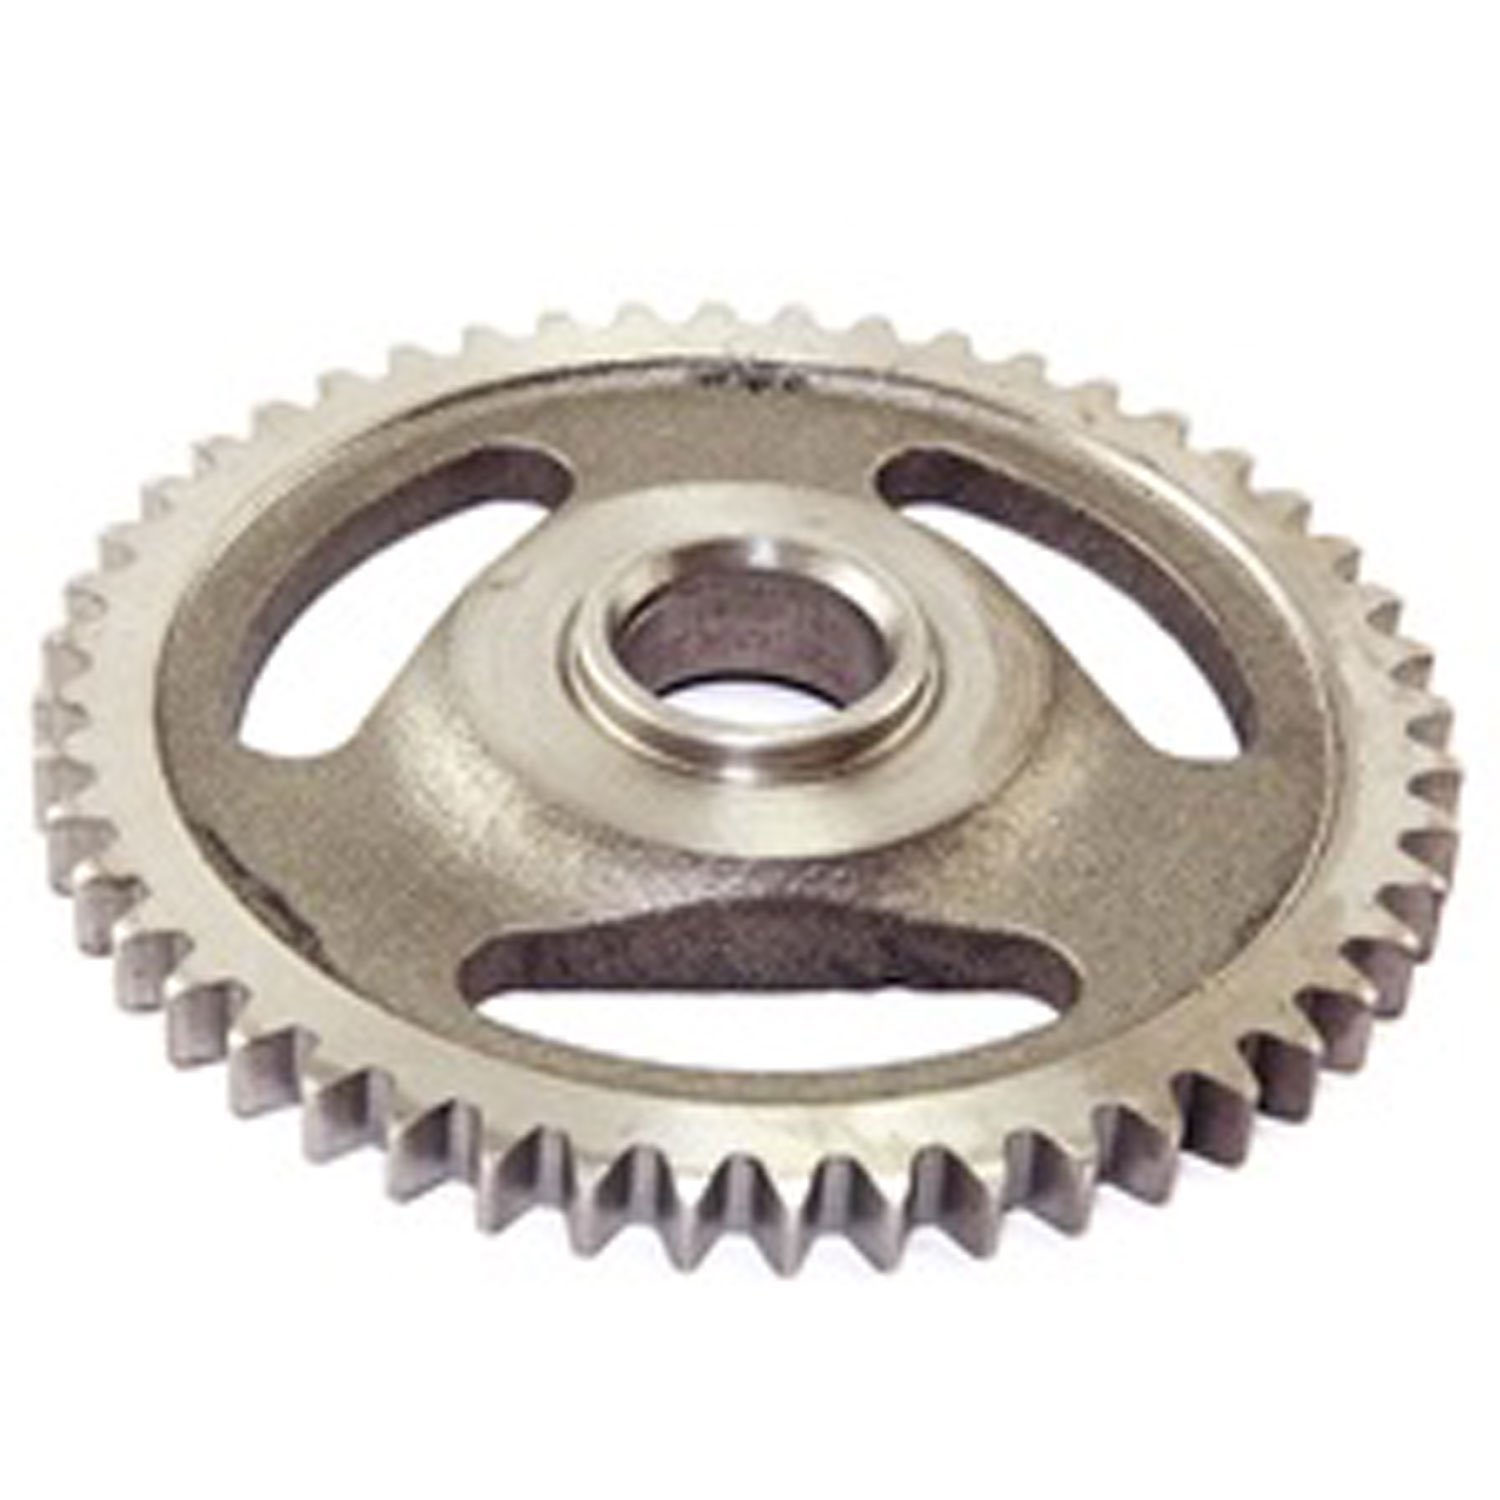 This camshaft sprocket from Omix-ADA fits the 4.0L engine used in 99-01 Jeep Cherokees 99-04 Grand C